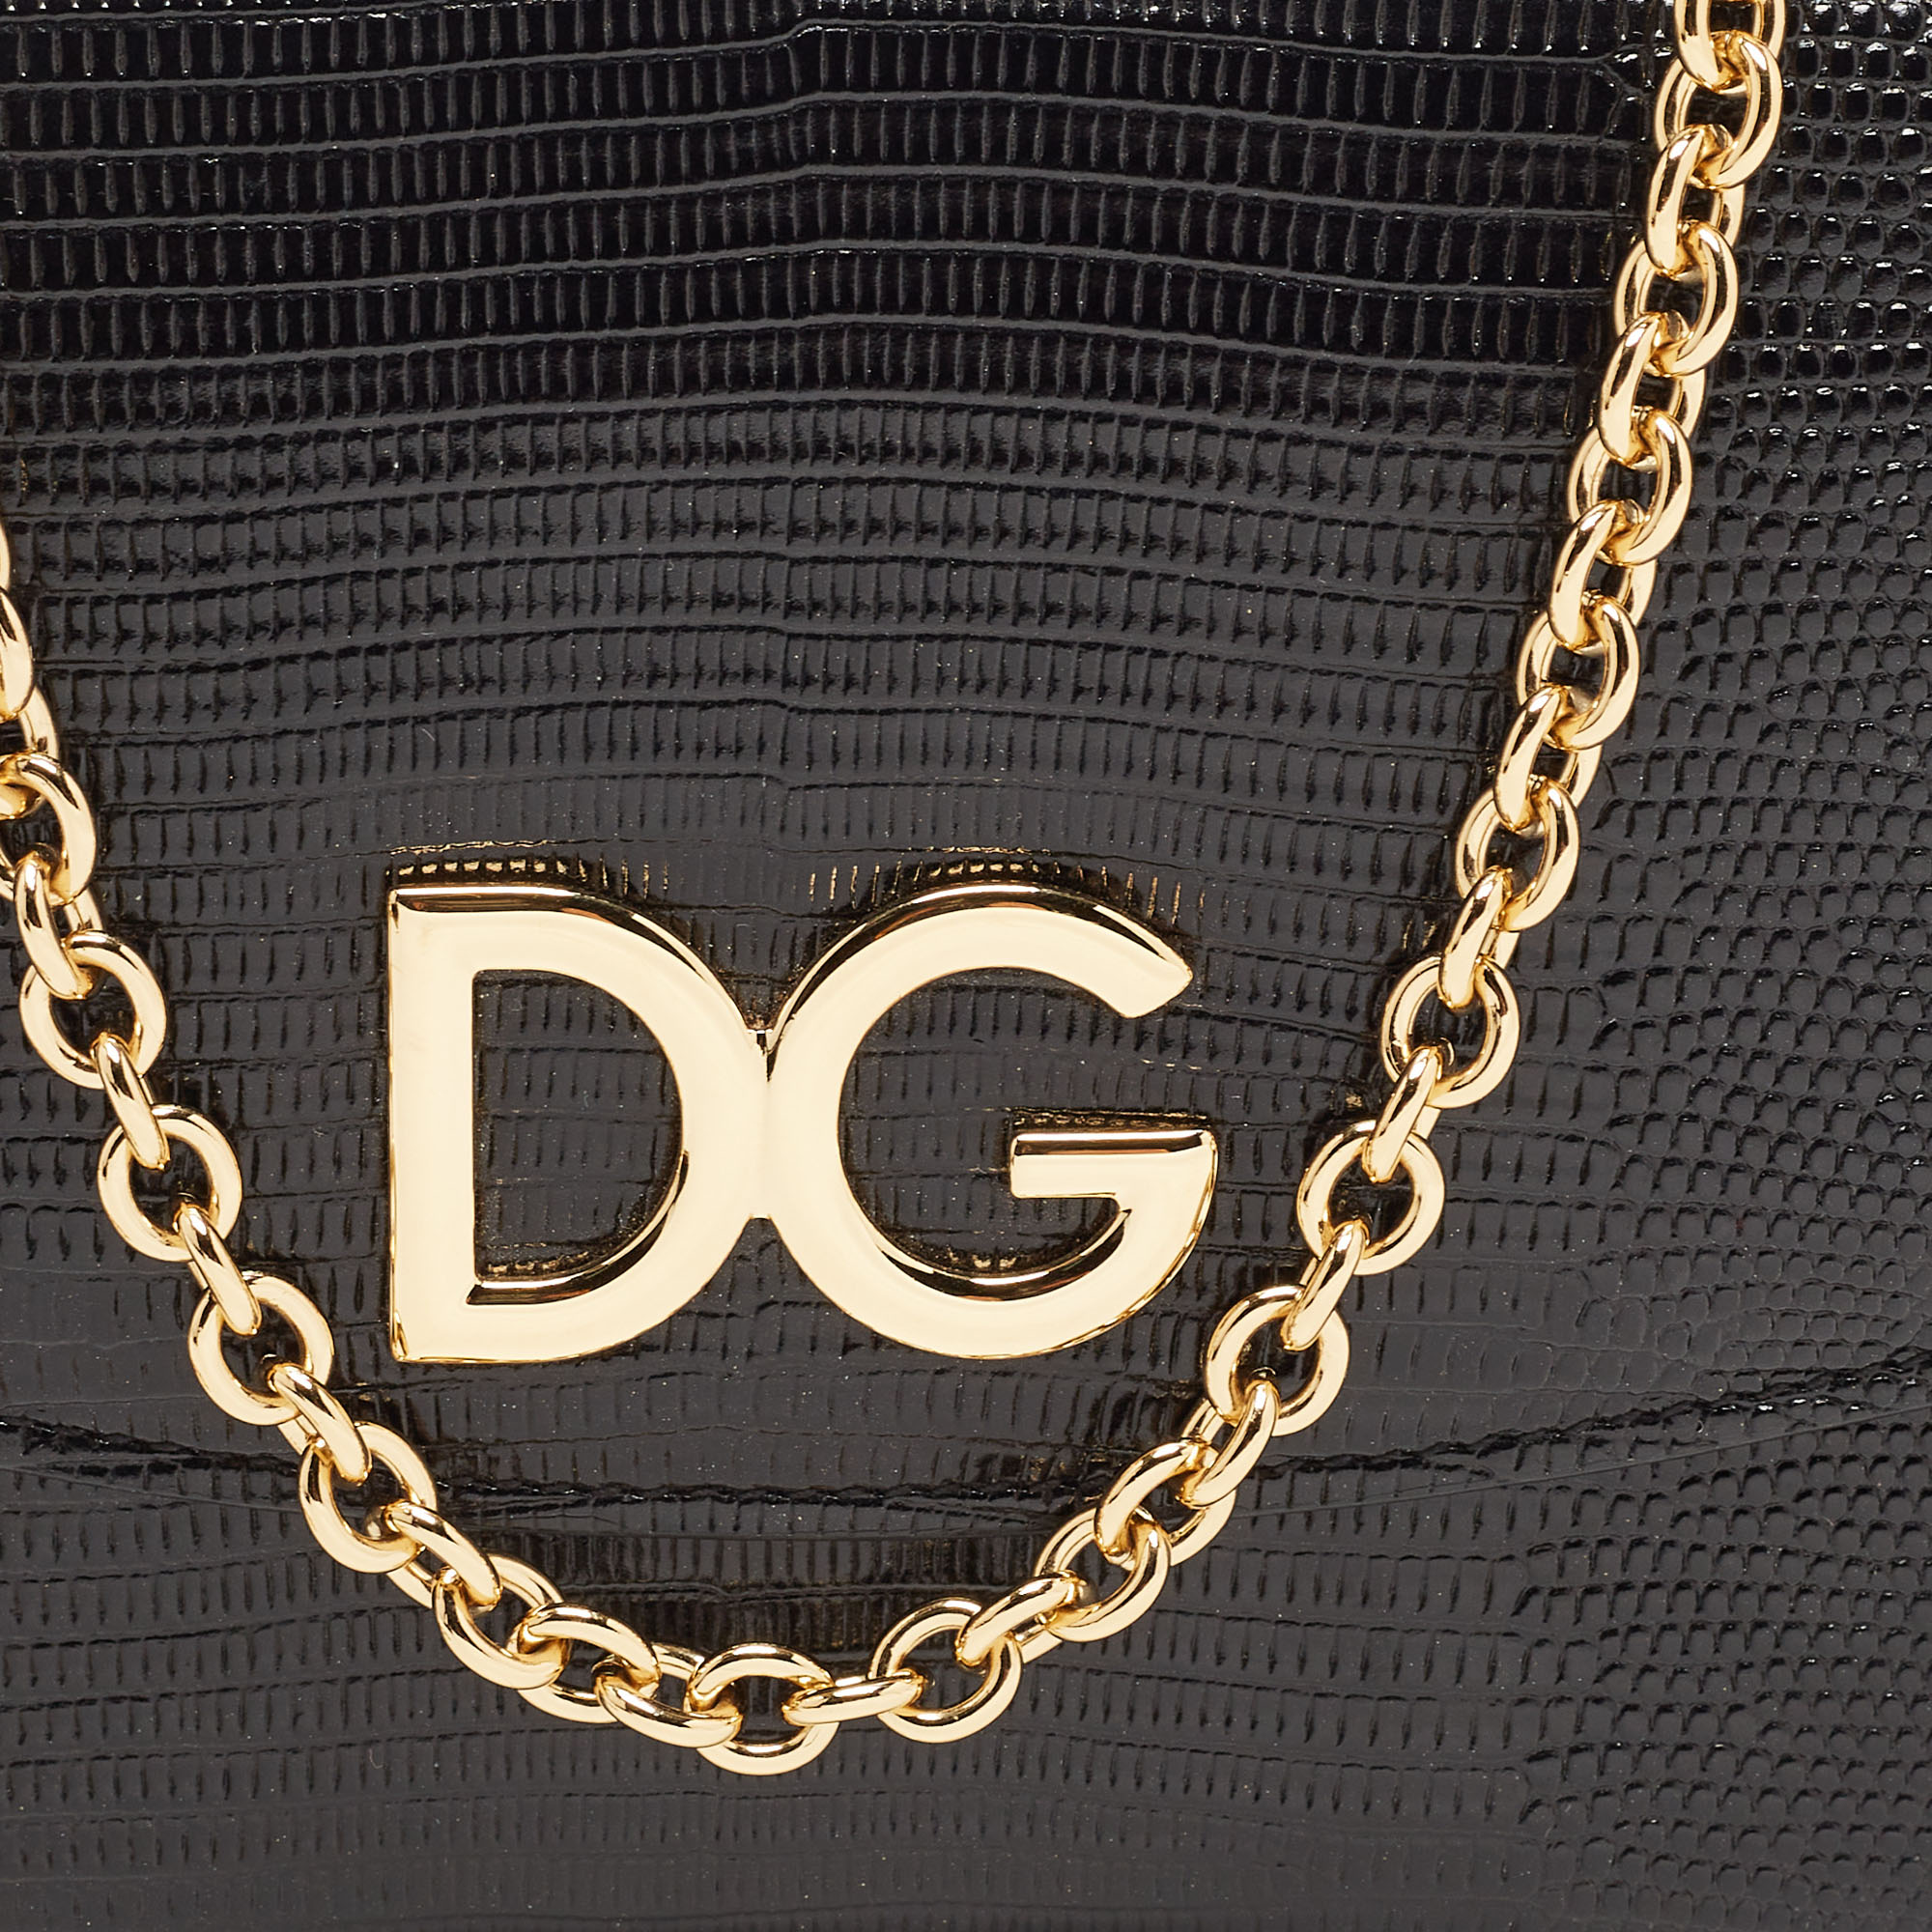 D&G Black Lizard Embossed Leather Flap Chain Clutch